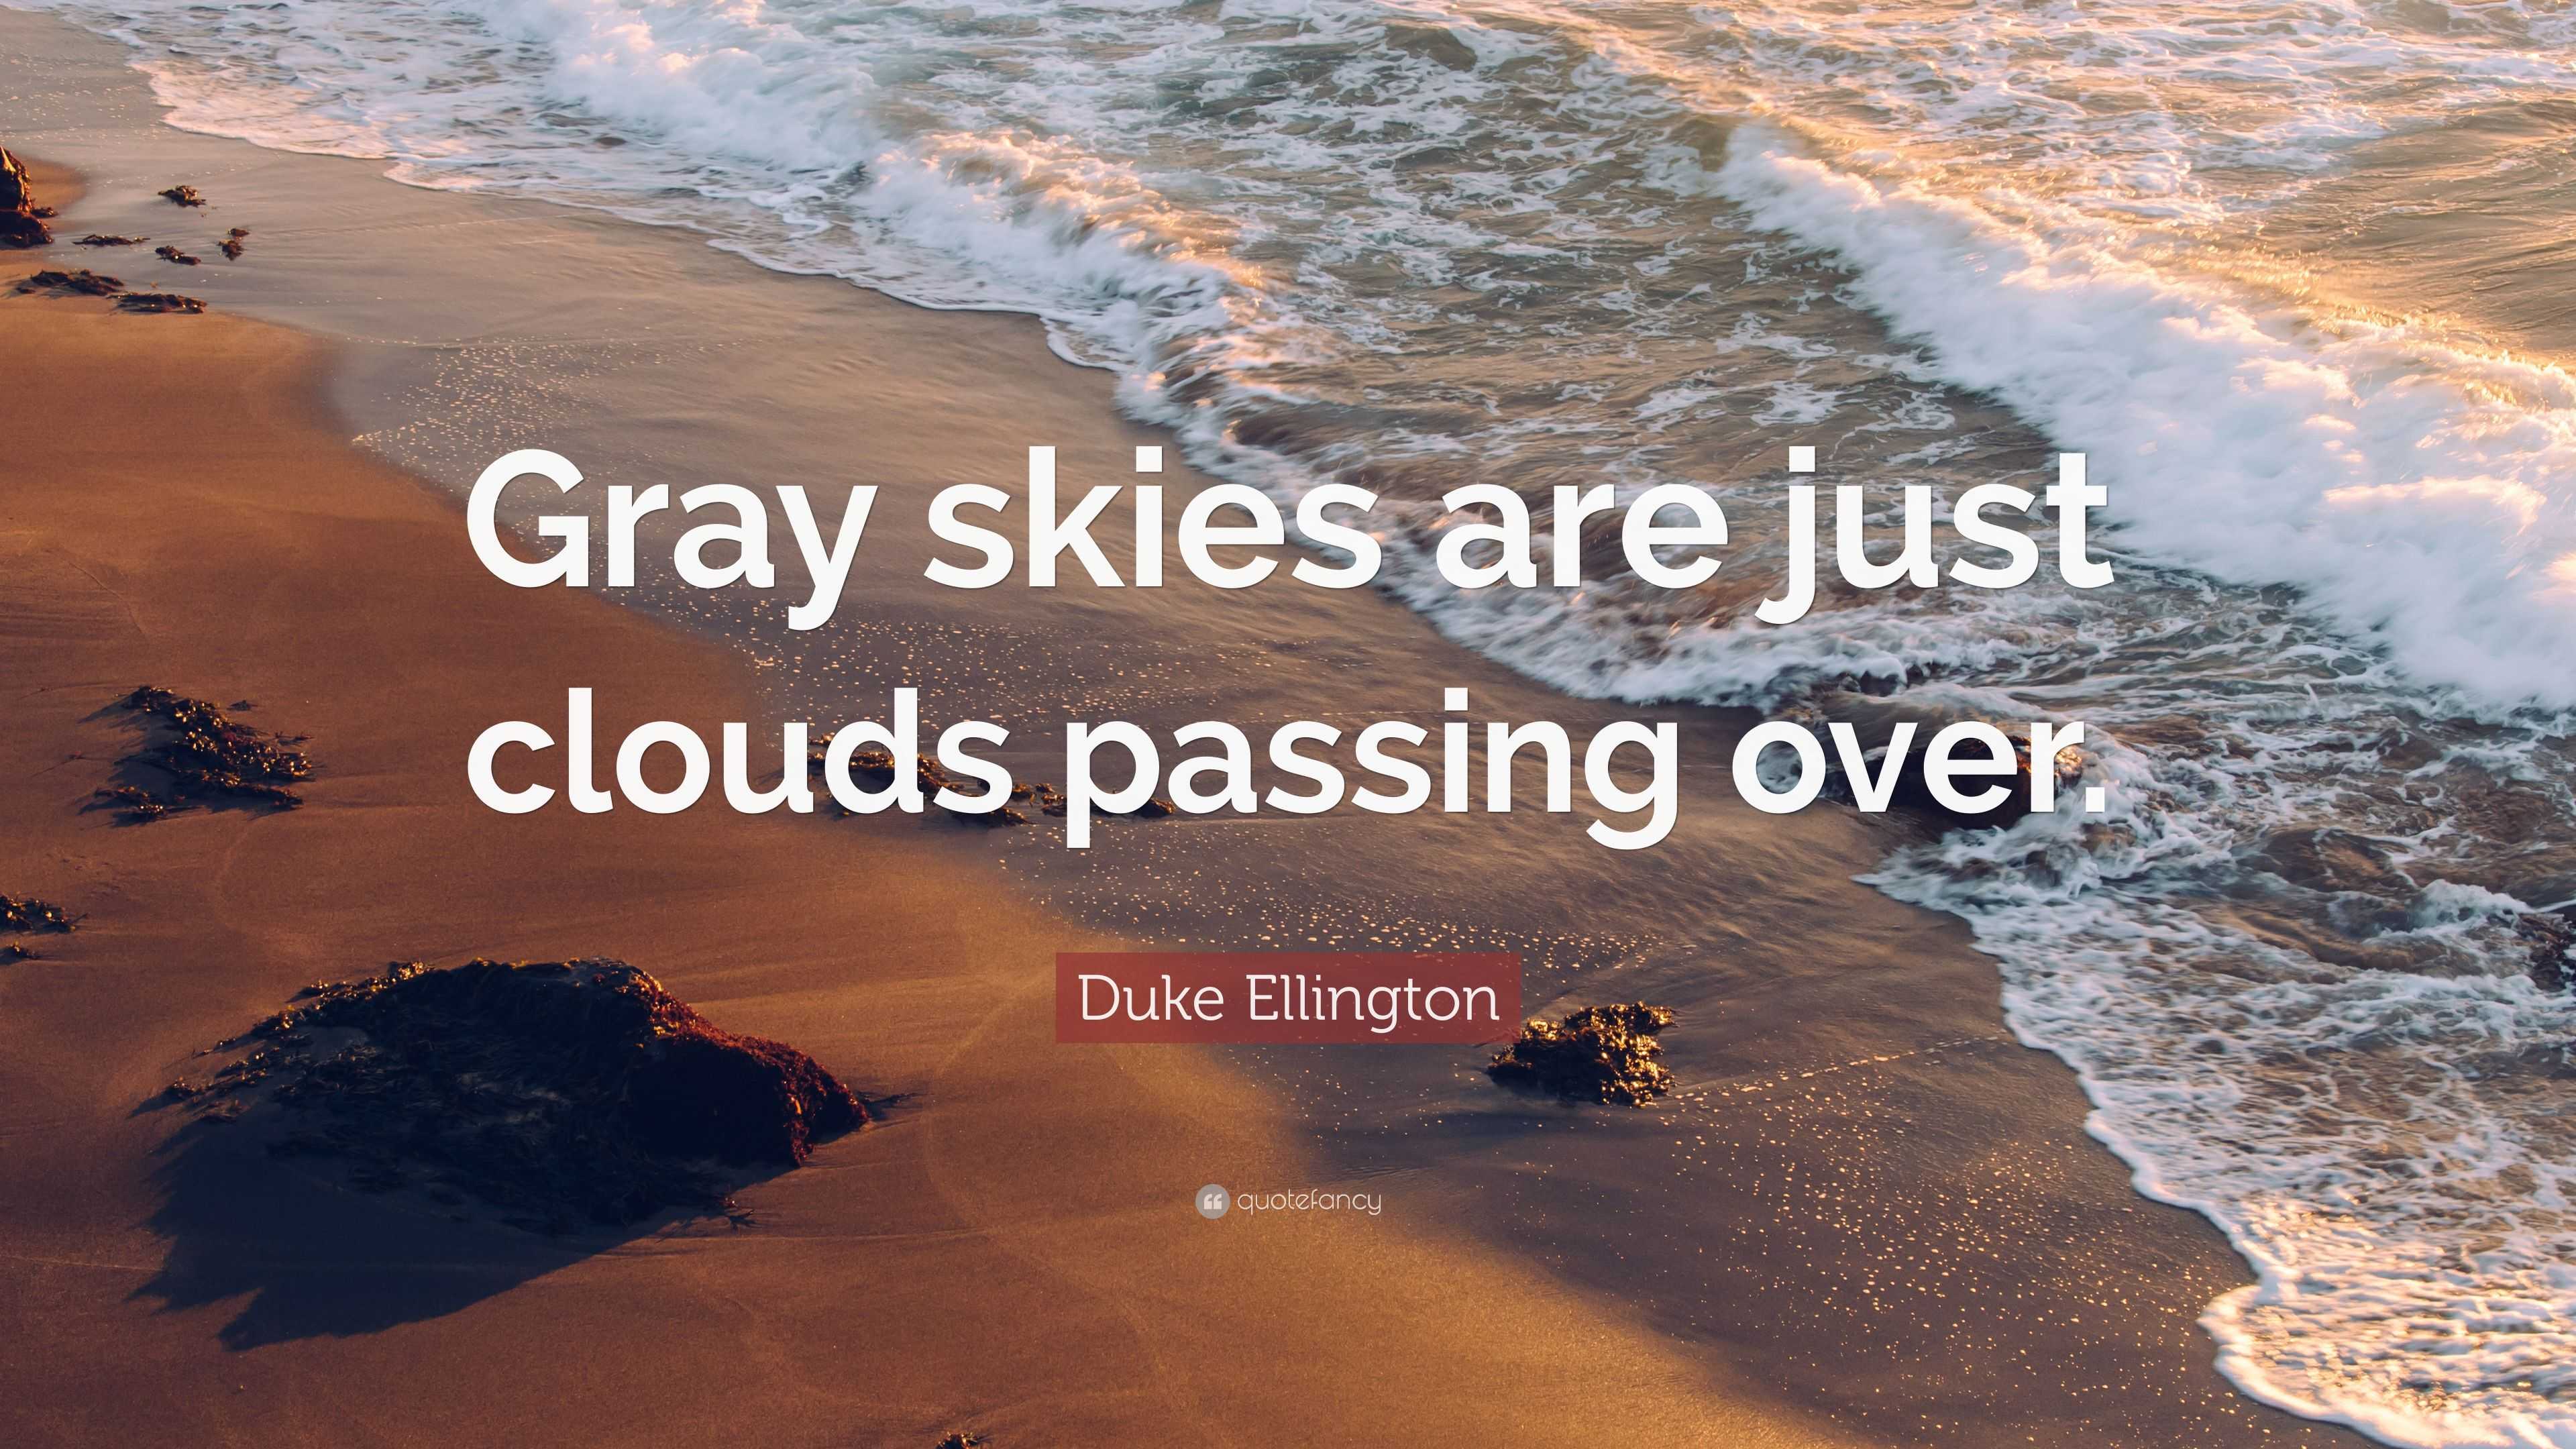 2807435 Duke Ellington Quote Gray Skies Are Just Clouds Passing Over 